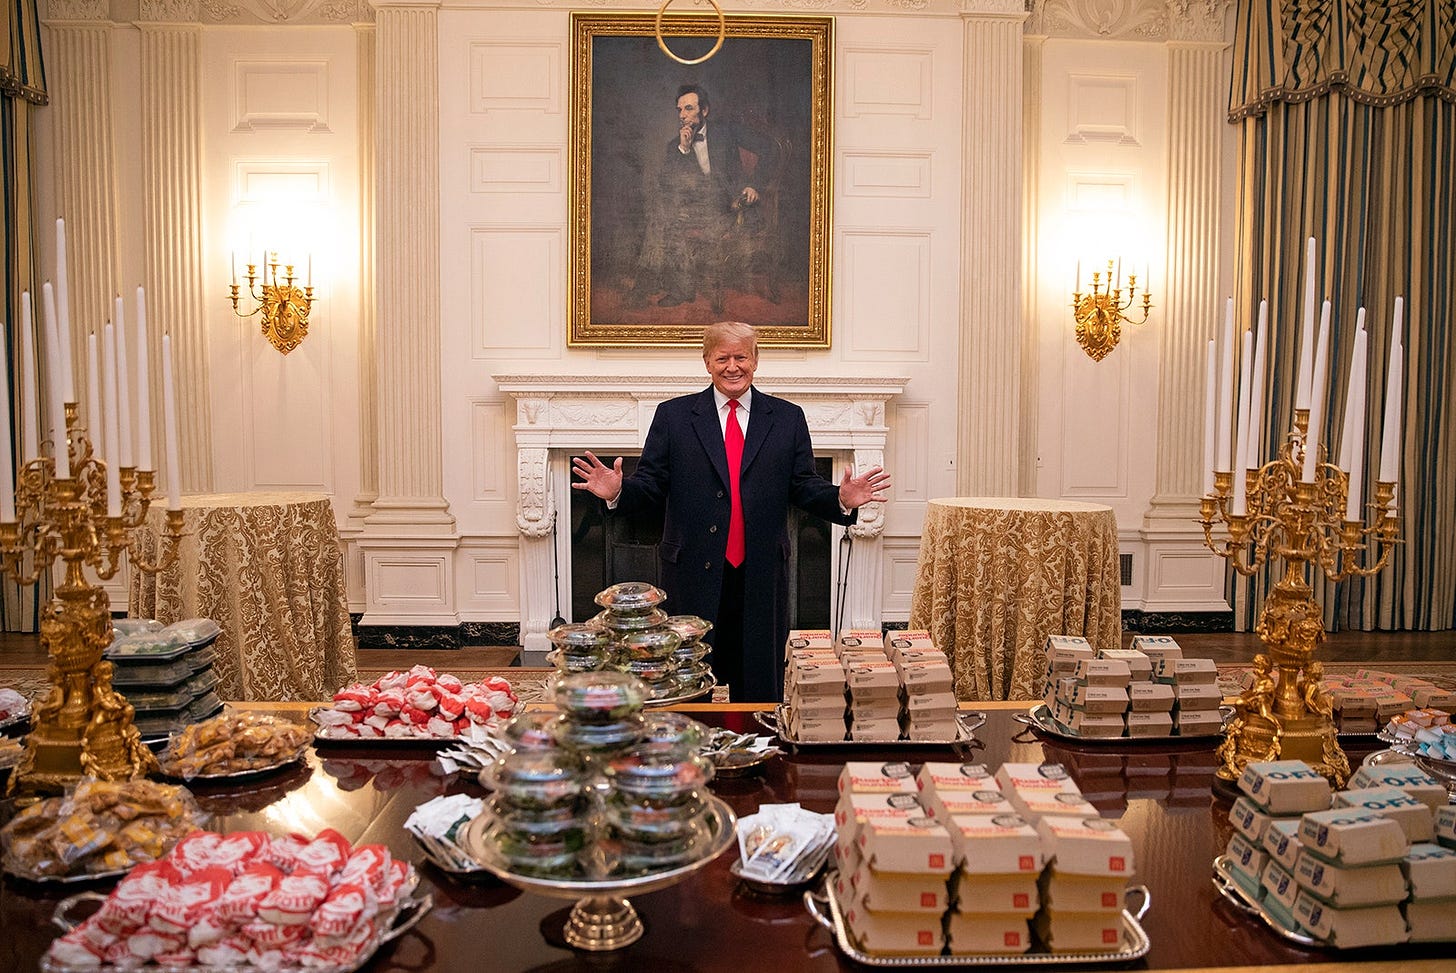 The Pure American Banality of Donald Trump's White House Fast-Food ...